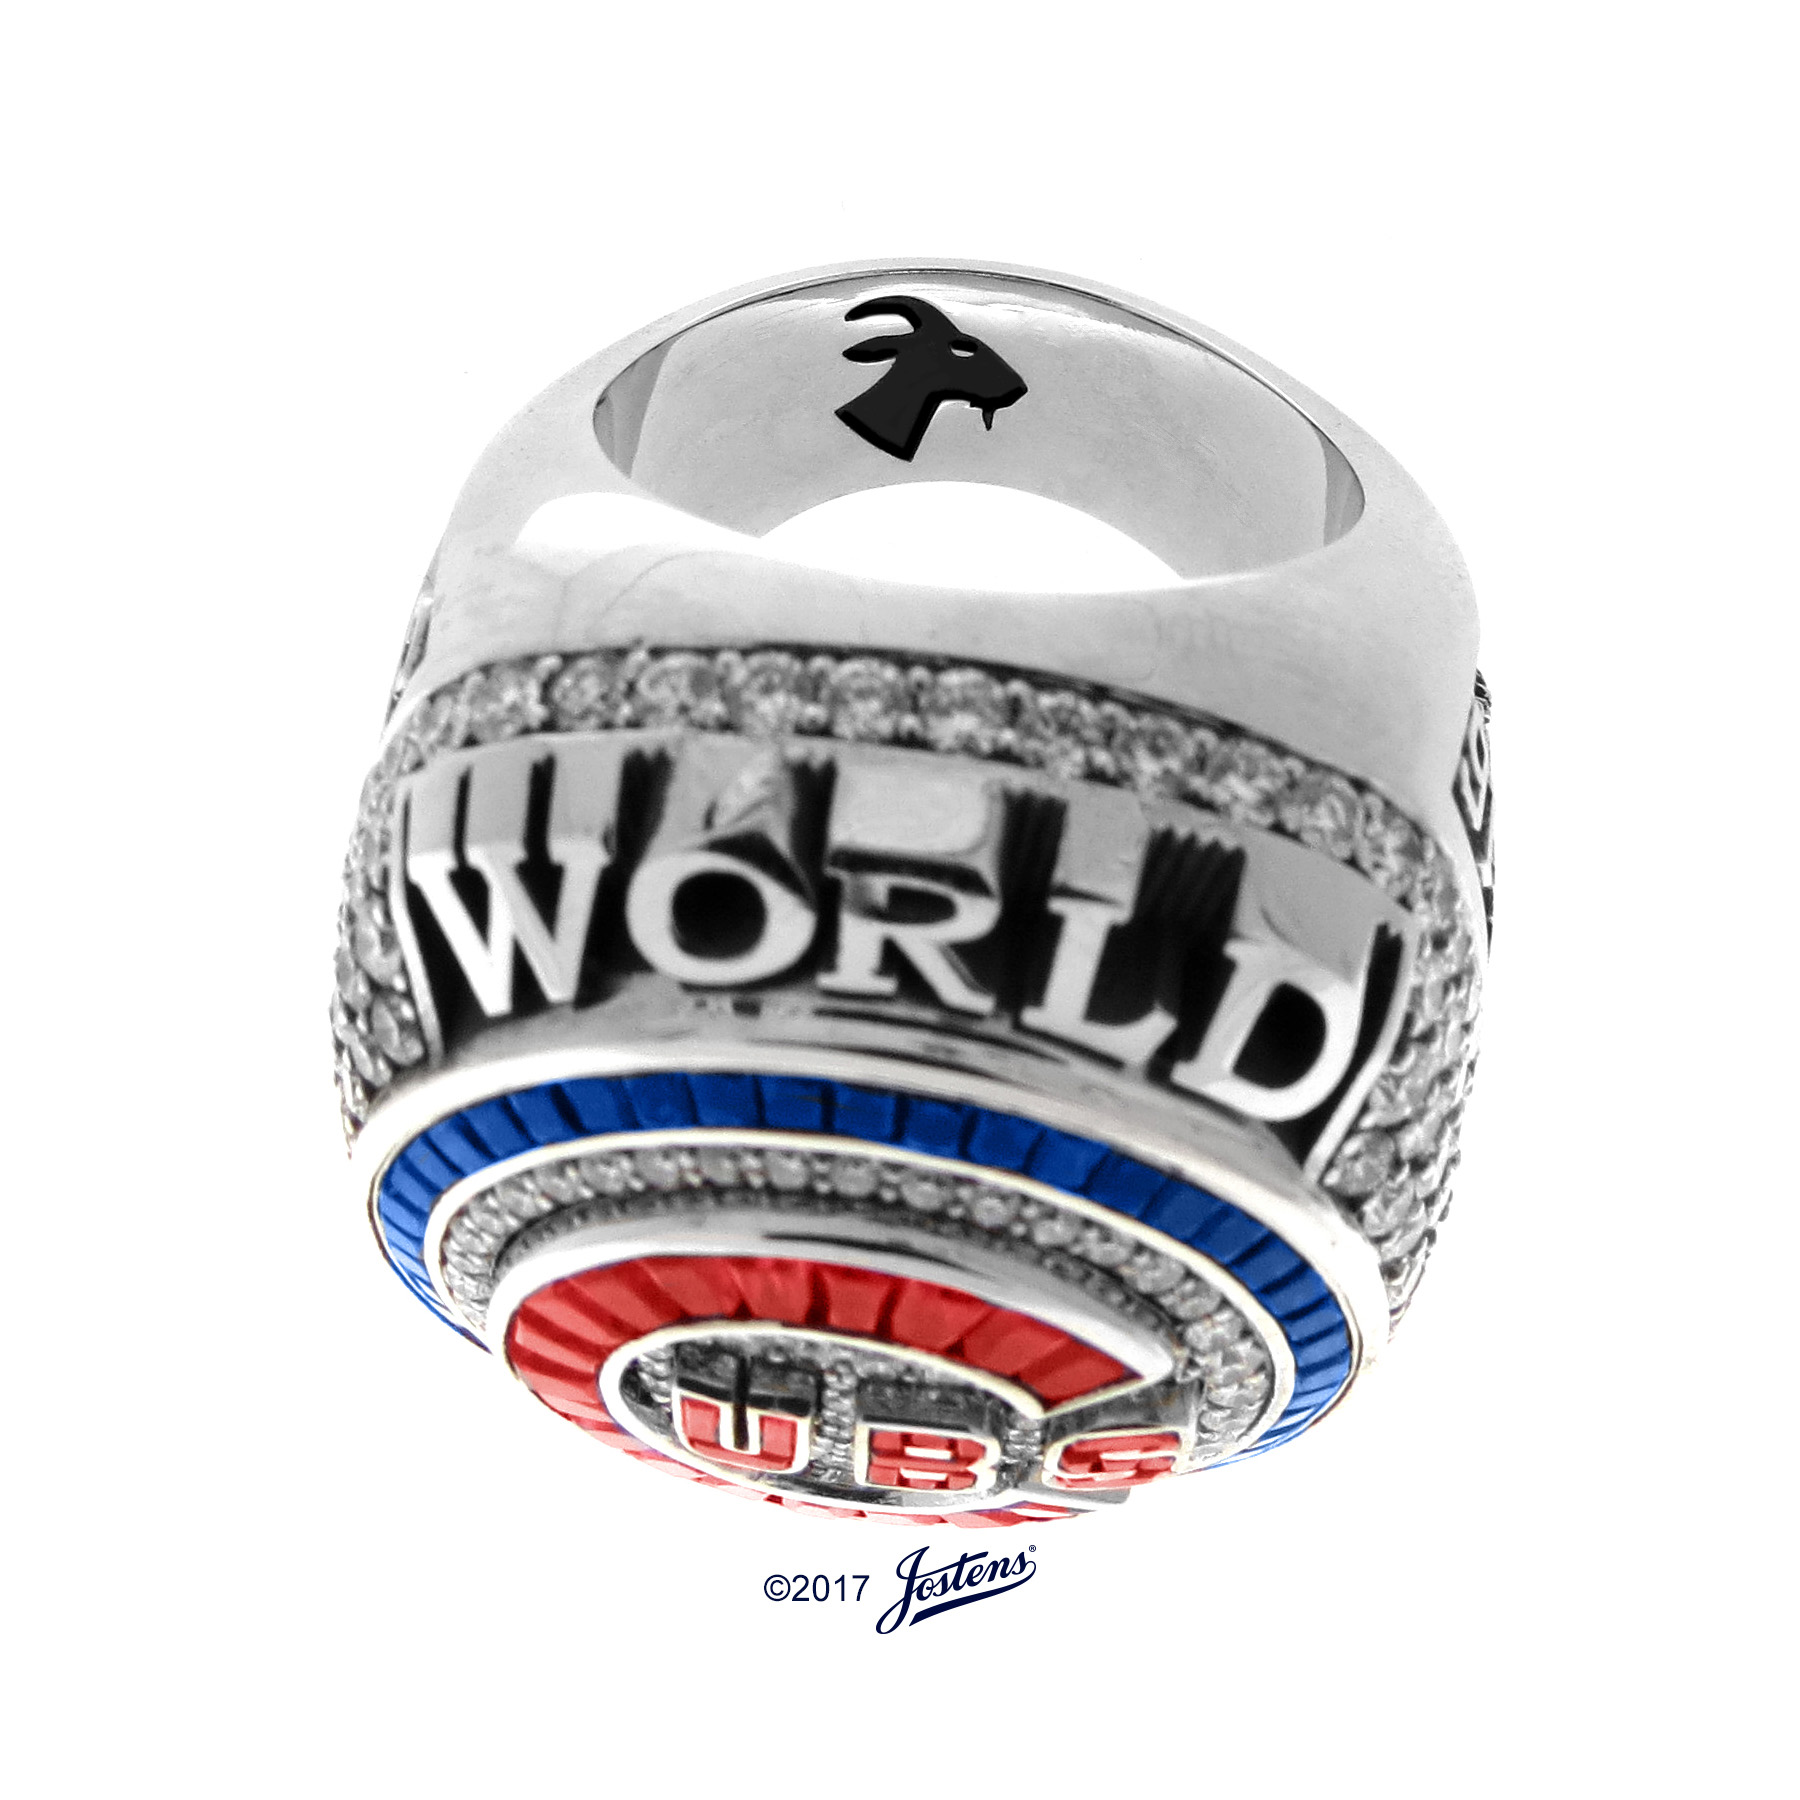 world series ring  The Rally Squirrel